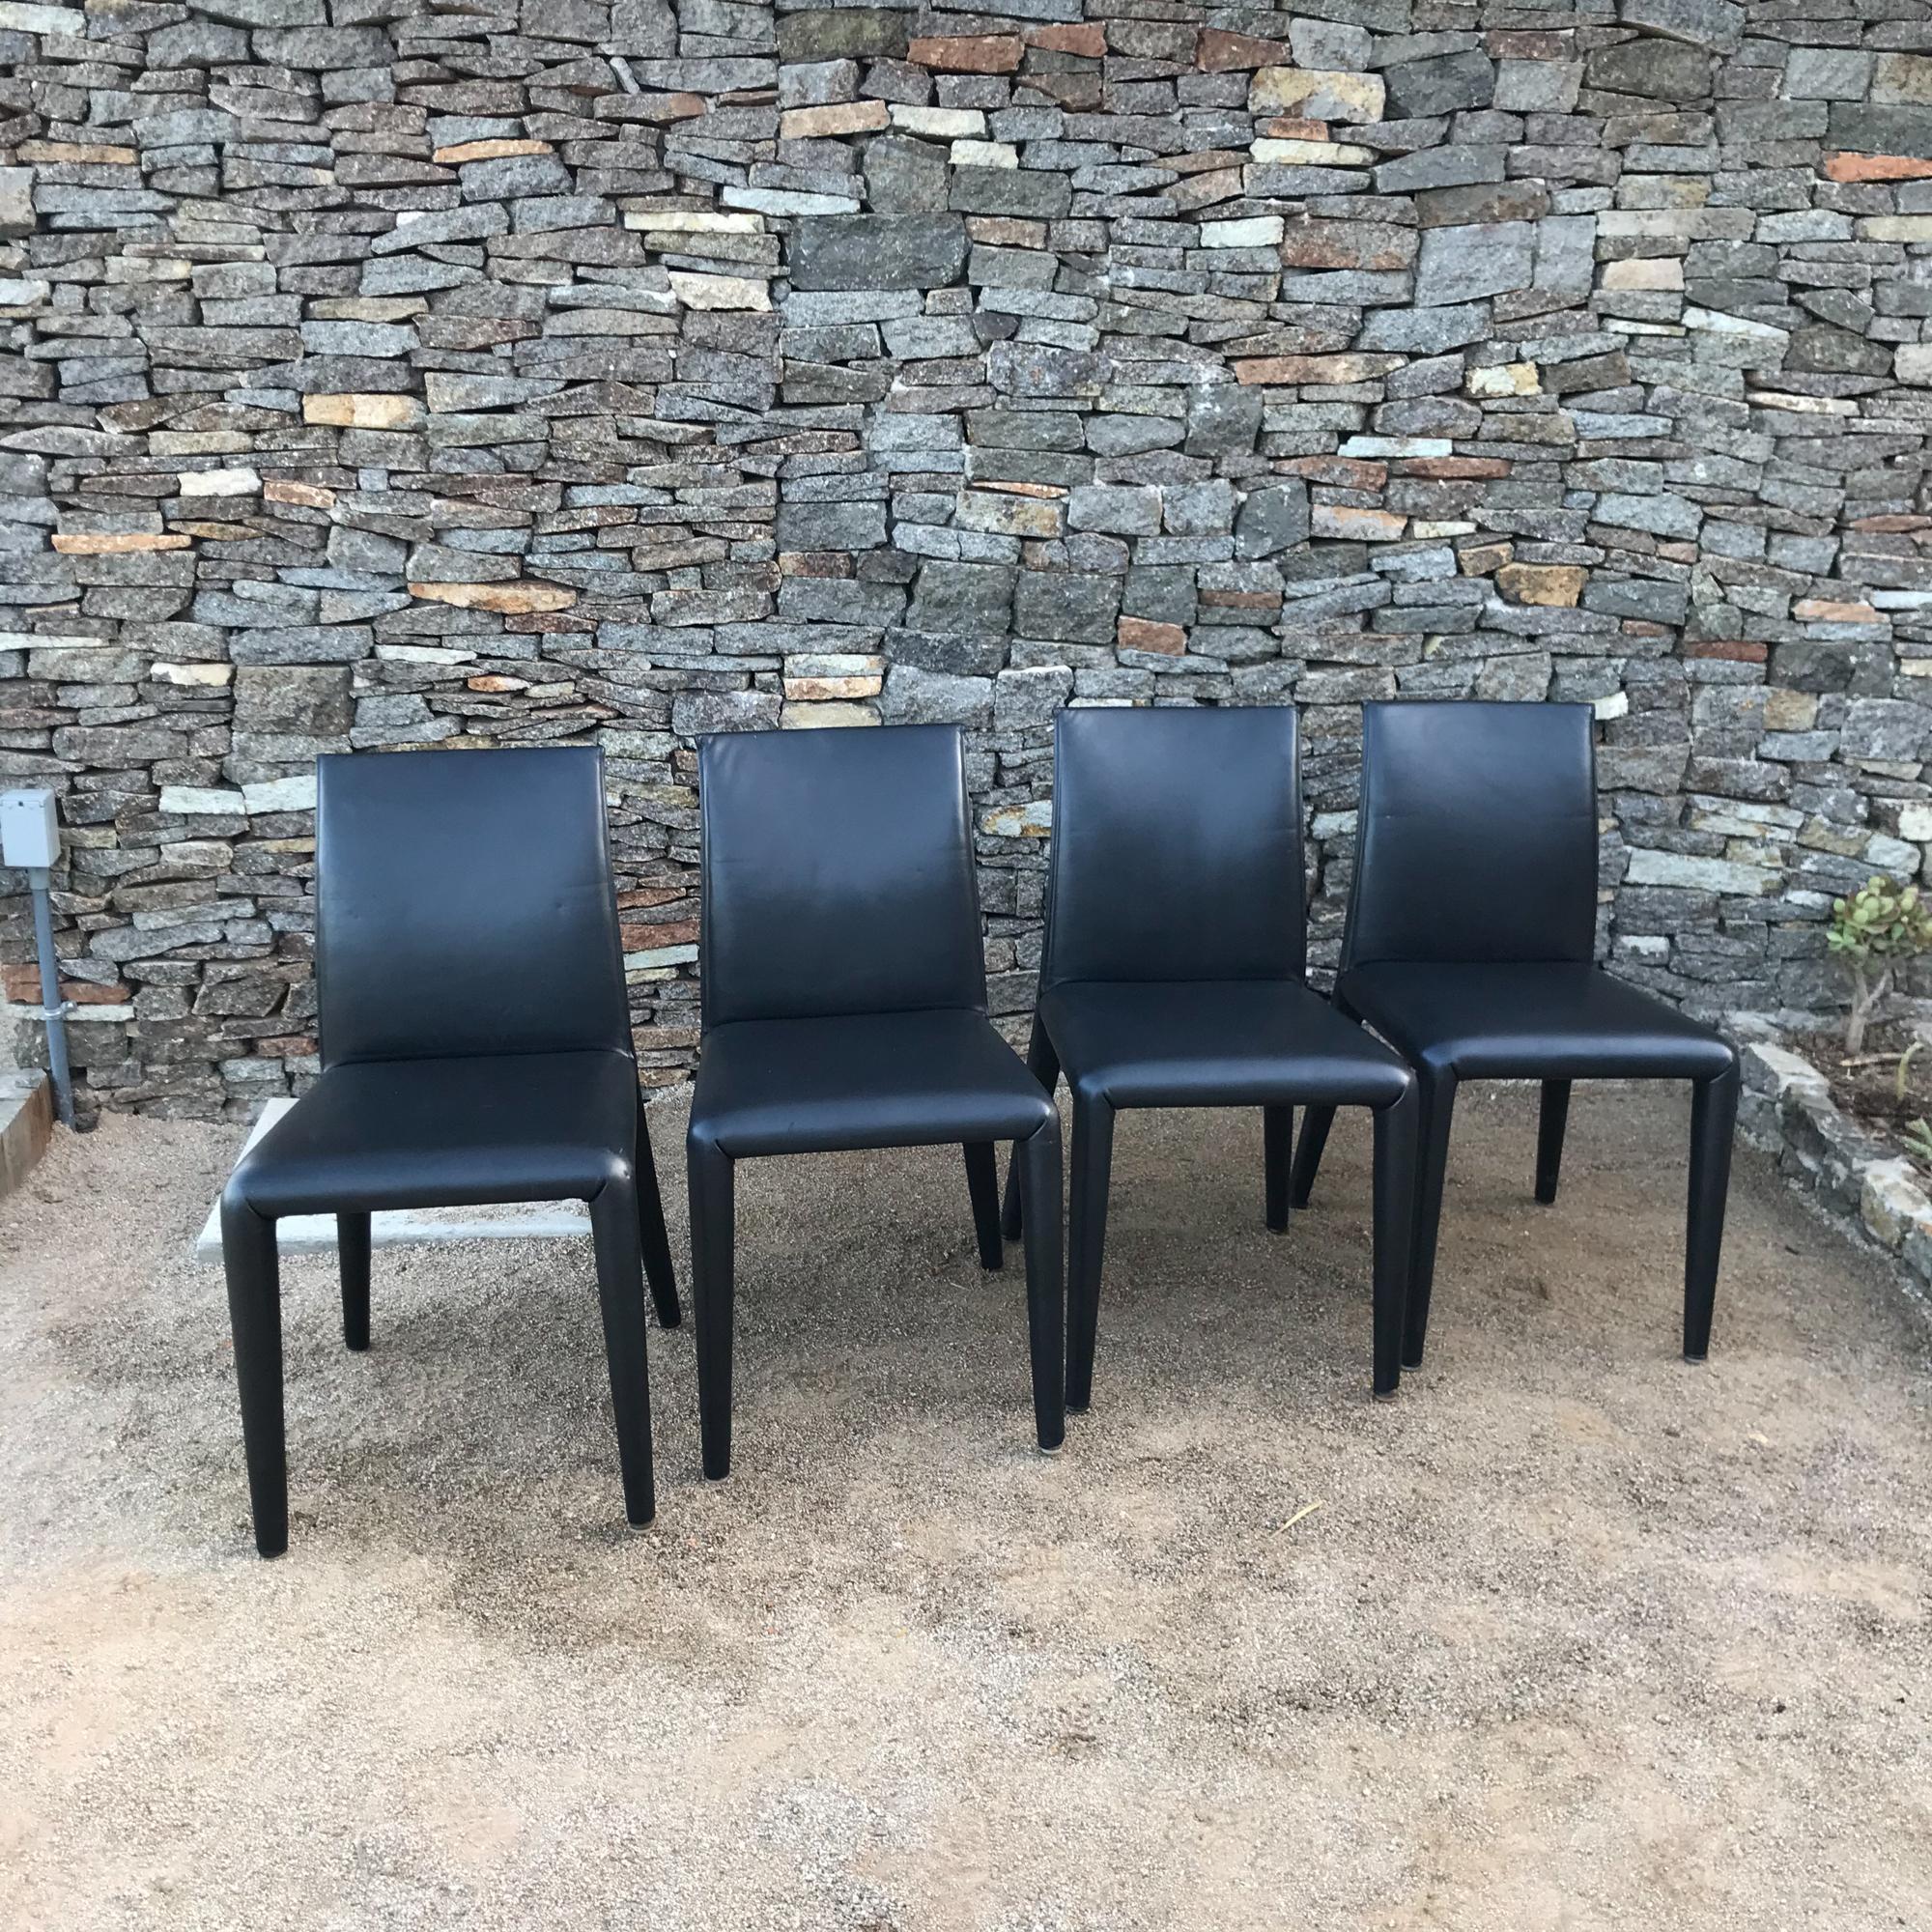 Fabulous Italian set of four dining chairs in sumptuous padded black leather designed by architect Mario Bellini for B&B Italia made in Italy.
Solid high quality modern design. Internal tubular steel frame, foam padding, covered in leather. Appears